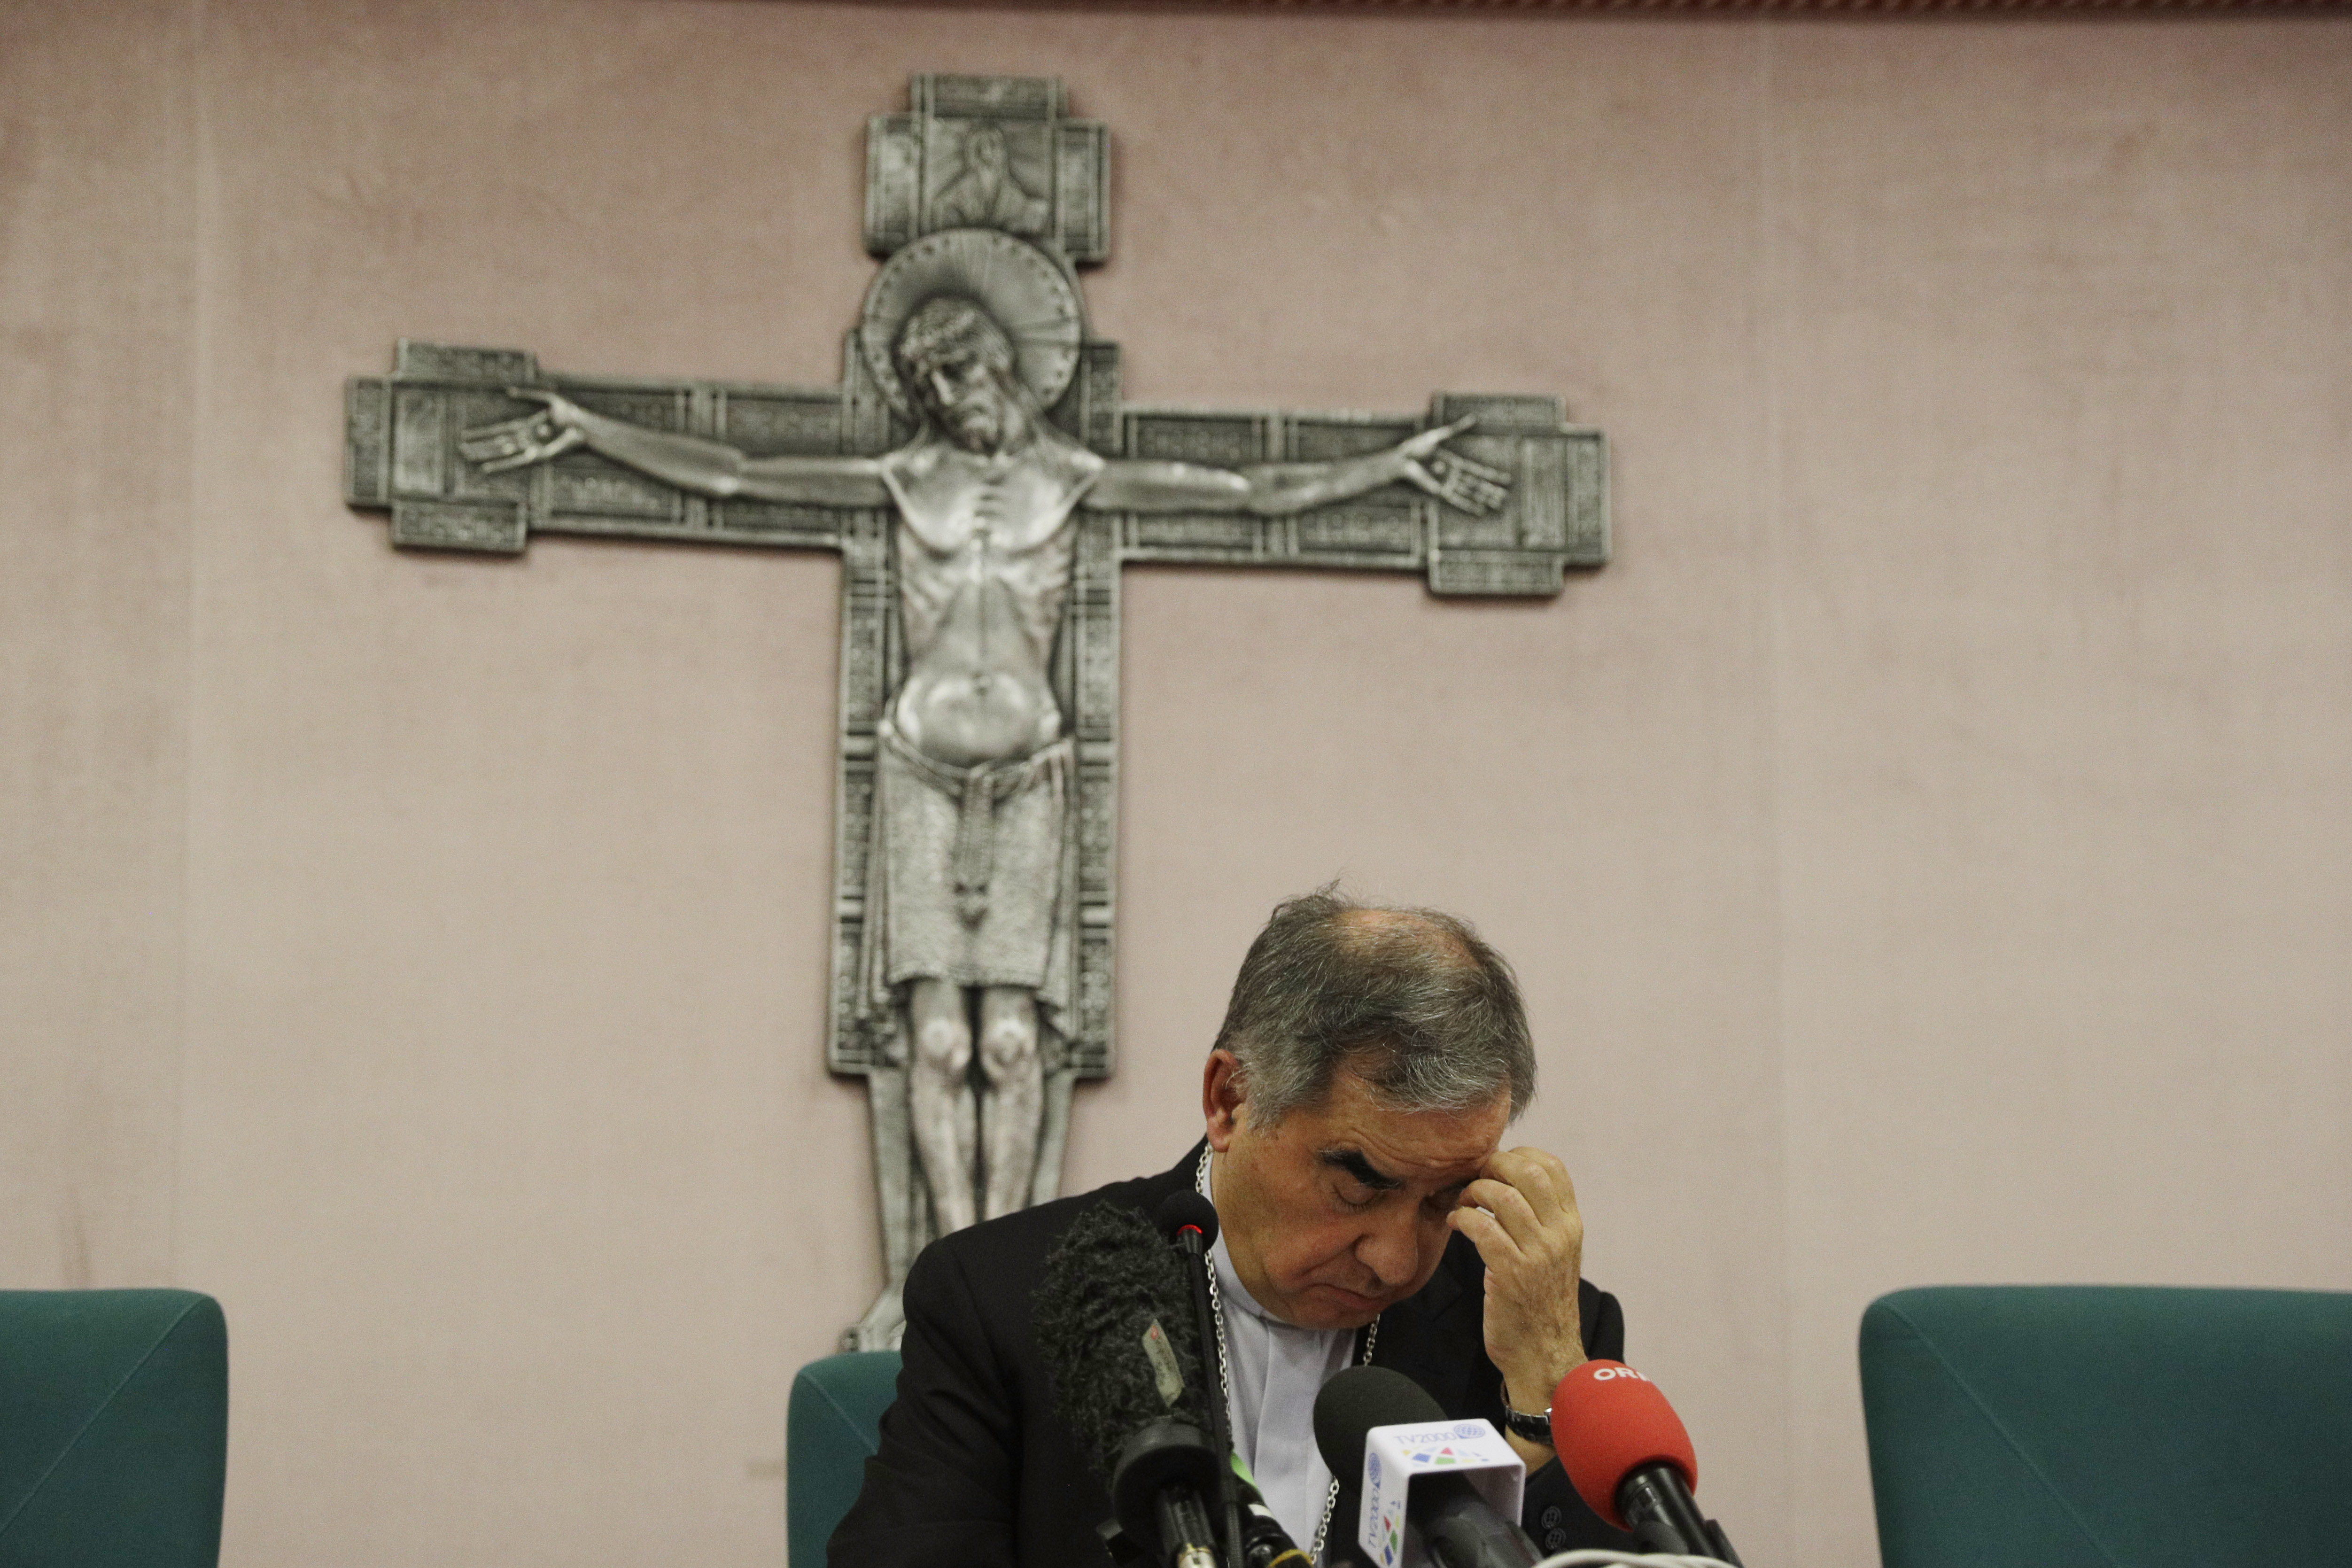 Cardinal Angelo Becciu talks to journalists during press conference in Rome, in this Friday, Sept. 25, 2020. (AP Photo/Gregorio Borgia)